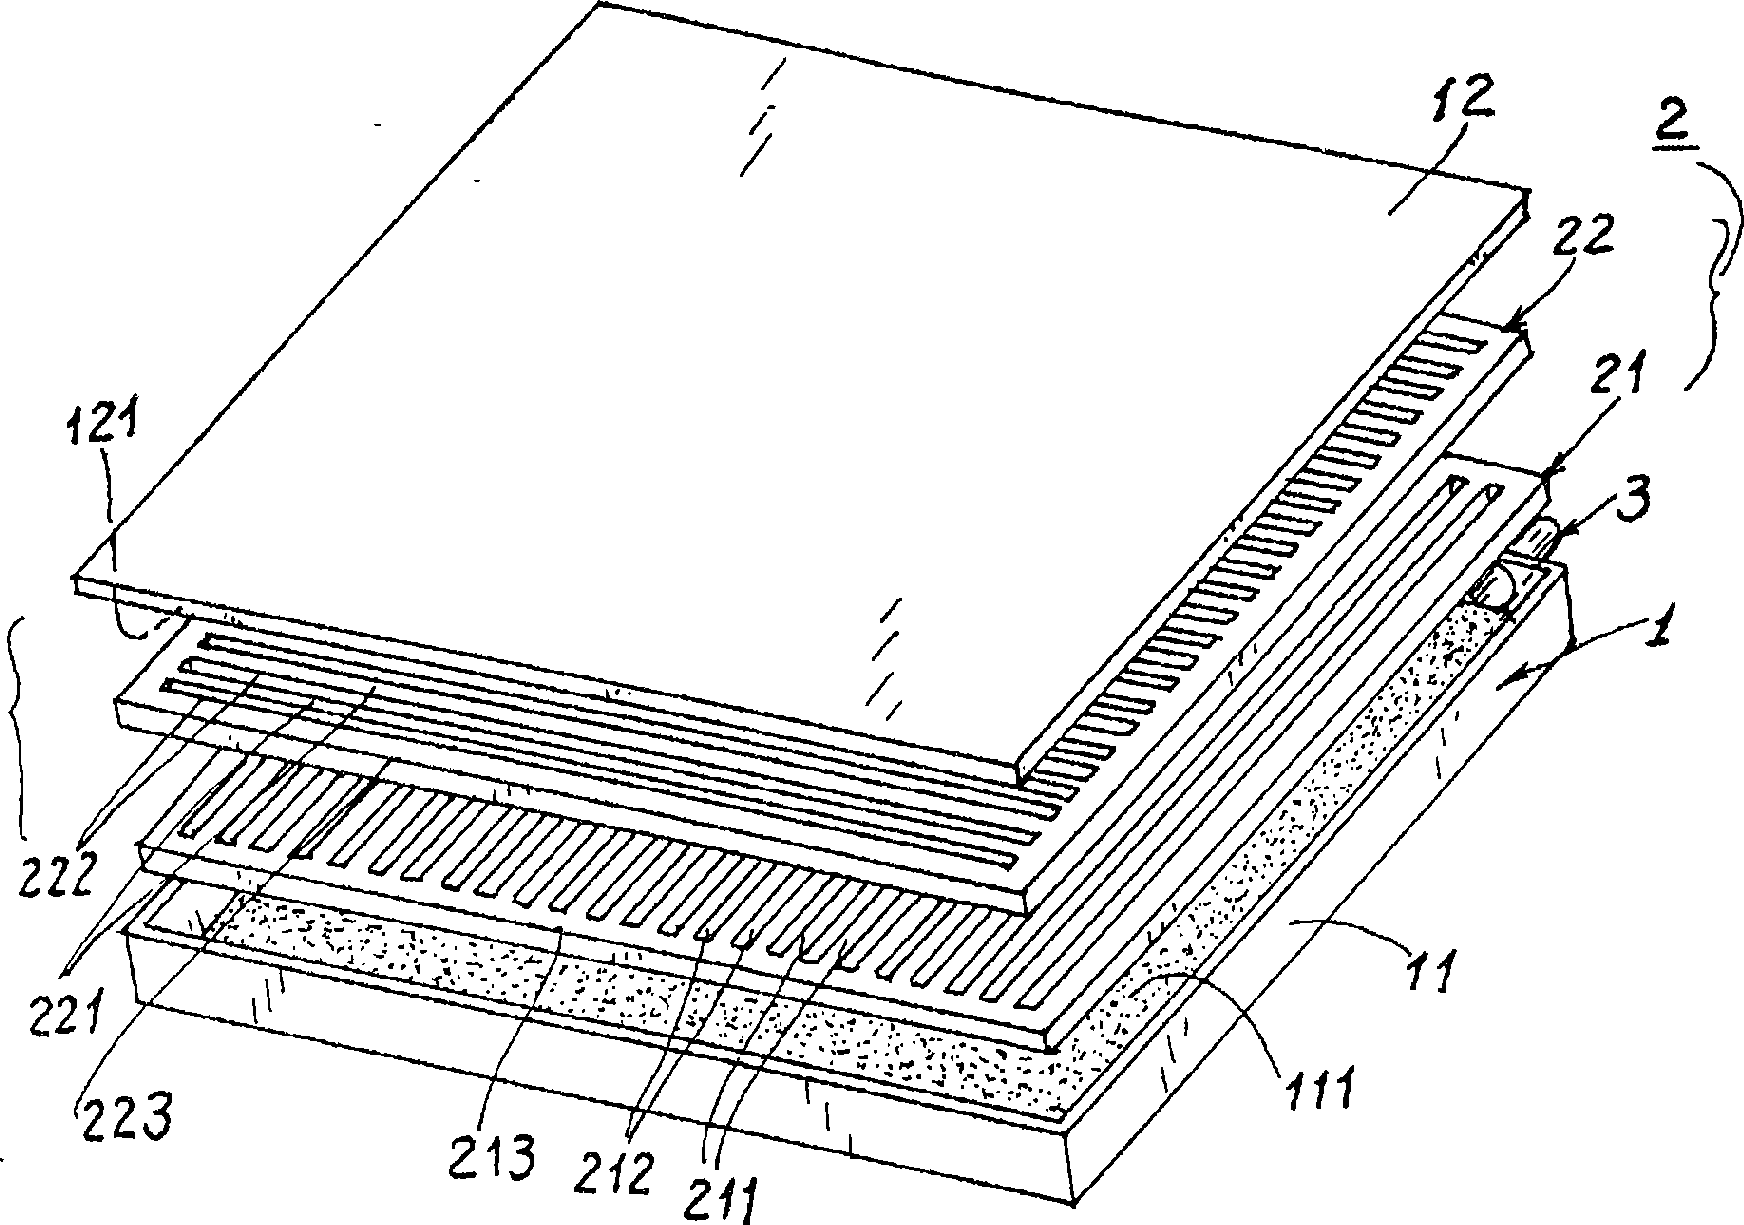 Soakage device capable of reinforcing supporting strength and capillary action